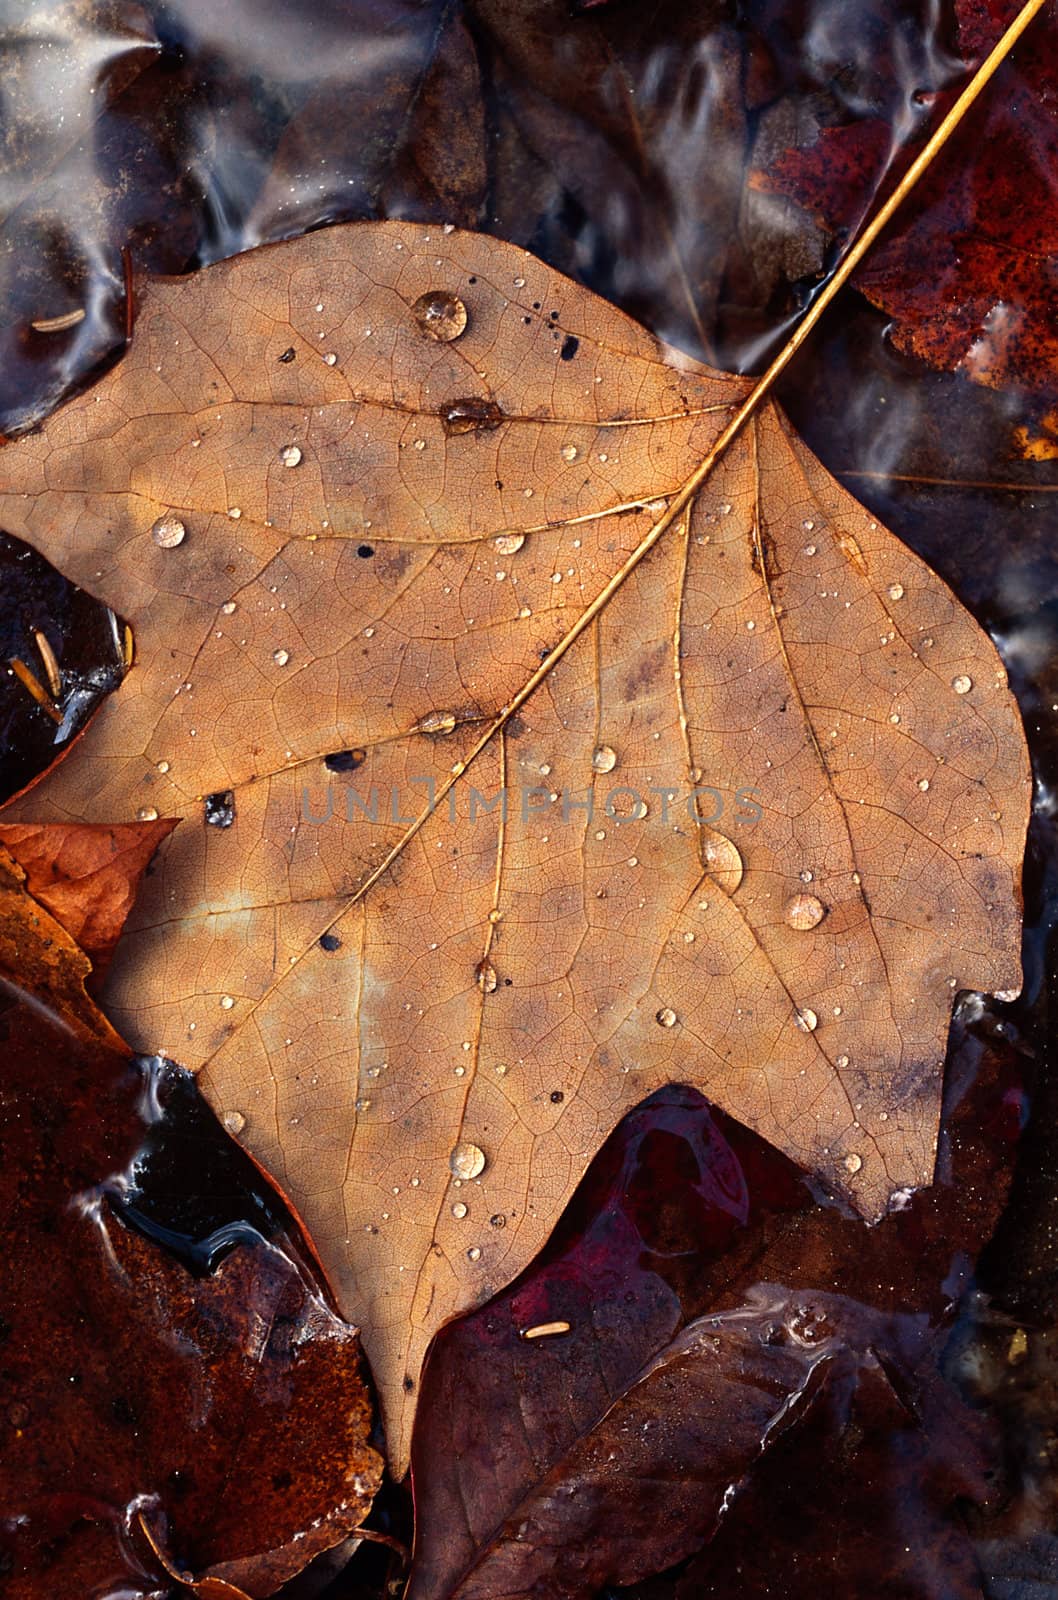 A single Poplar leaf with water droplets